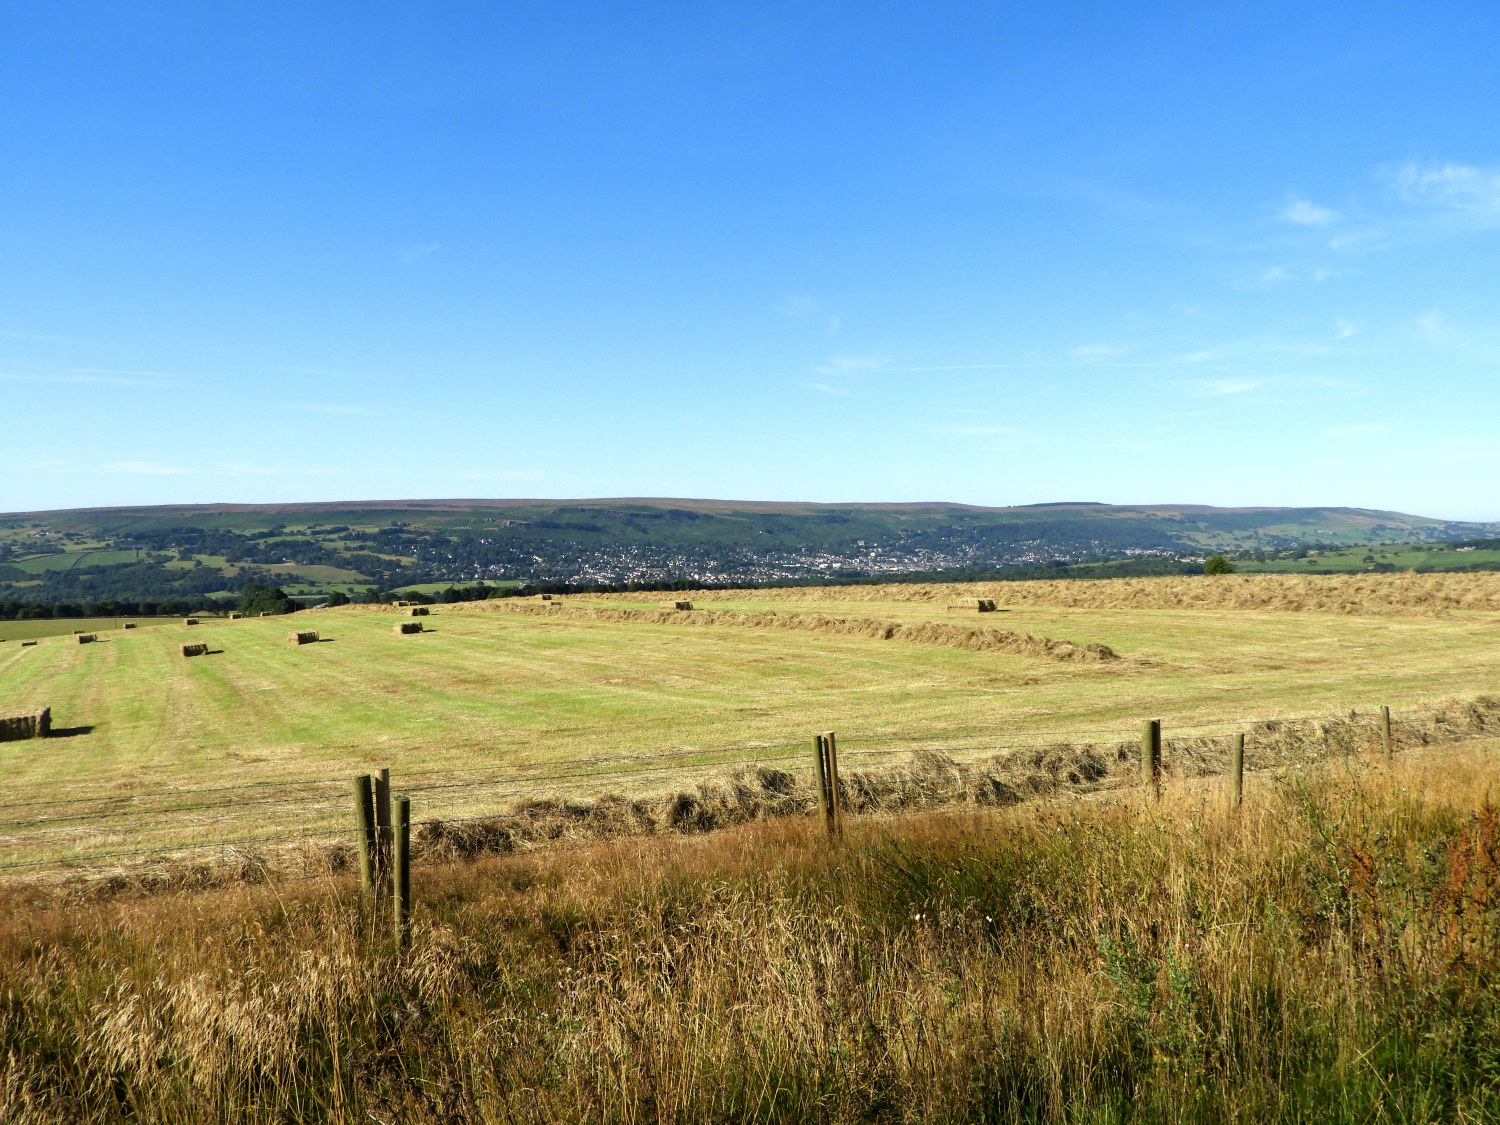 The view of Ilkley and Ilkley Moor from Dunkirk